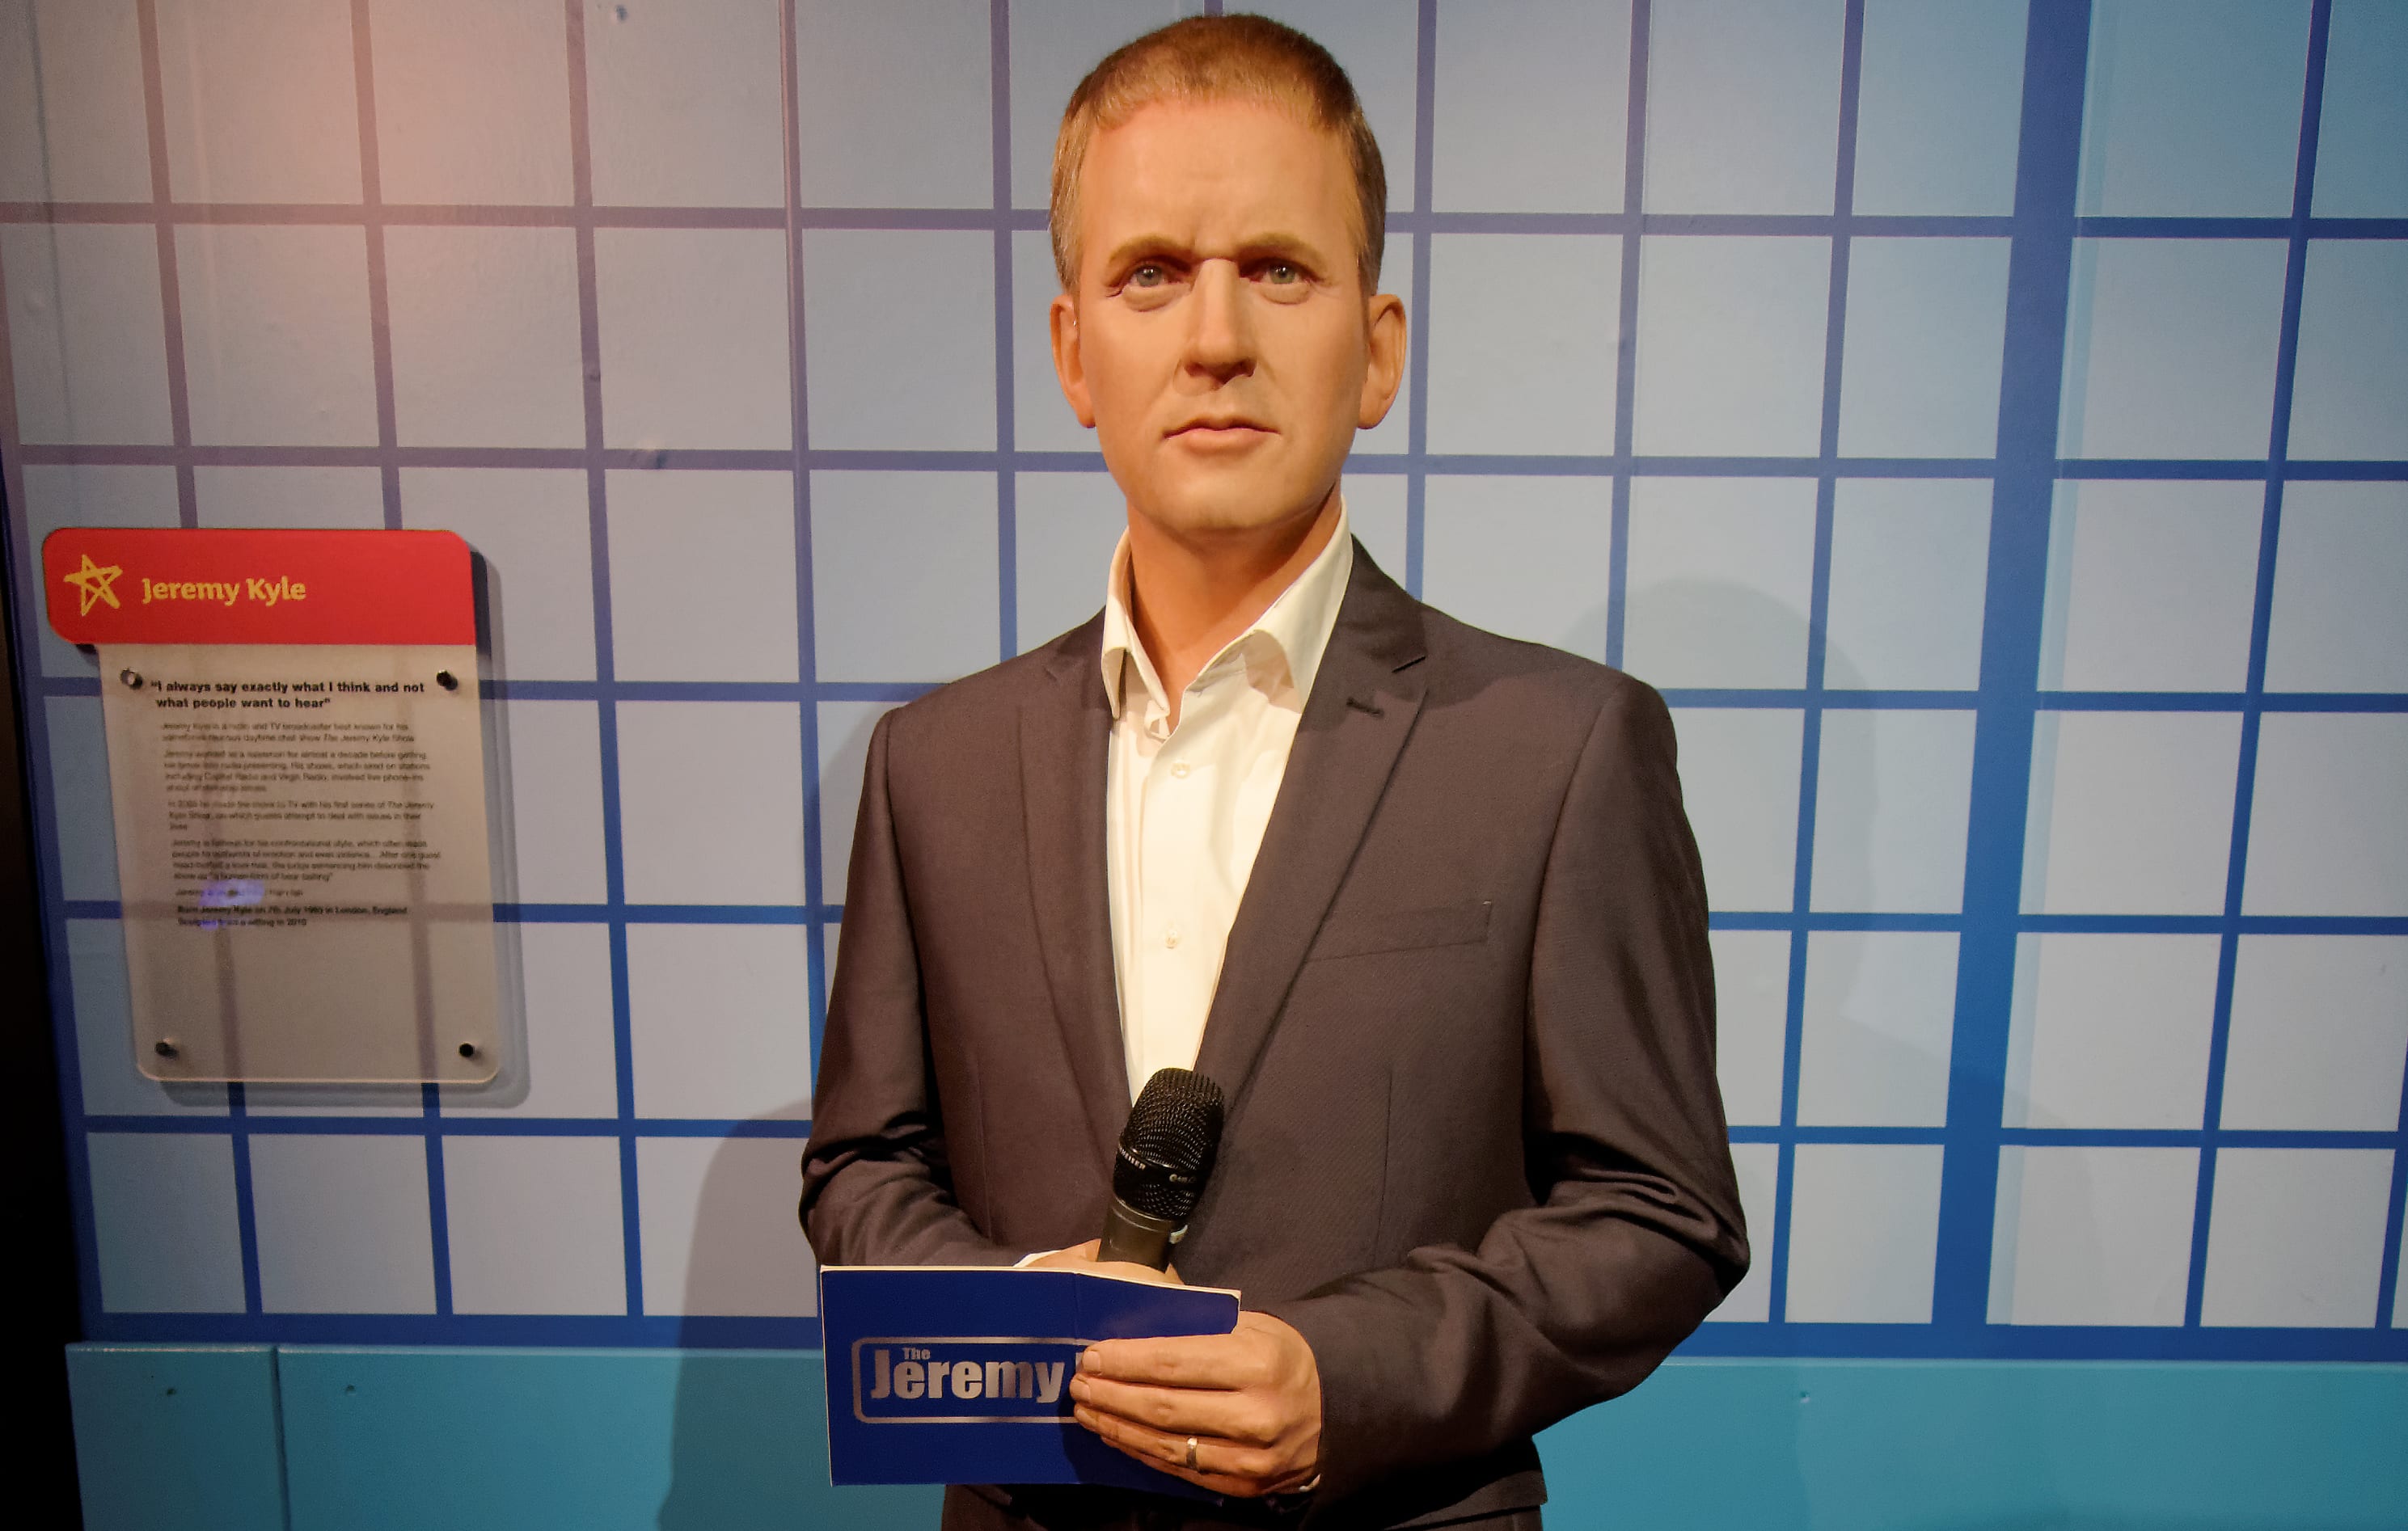 Jeremy Kyle - as a waxwork in Madame Tussauds, Blackpool. His show is under the microscope after being axed, following the death of a guest.